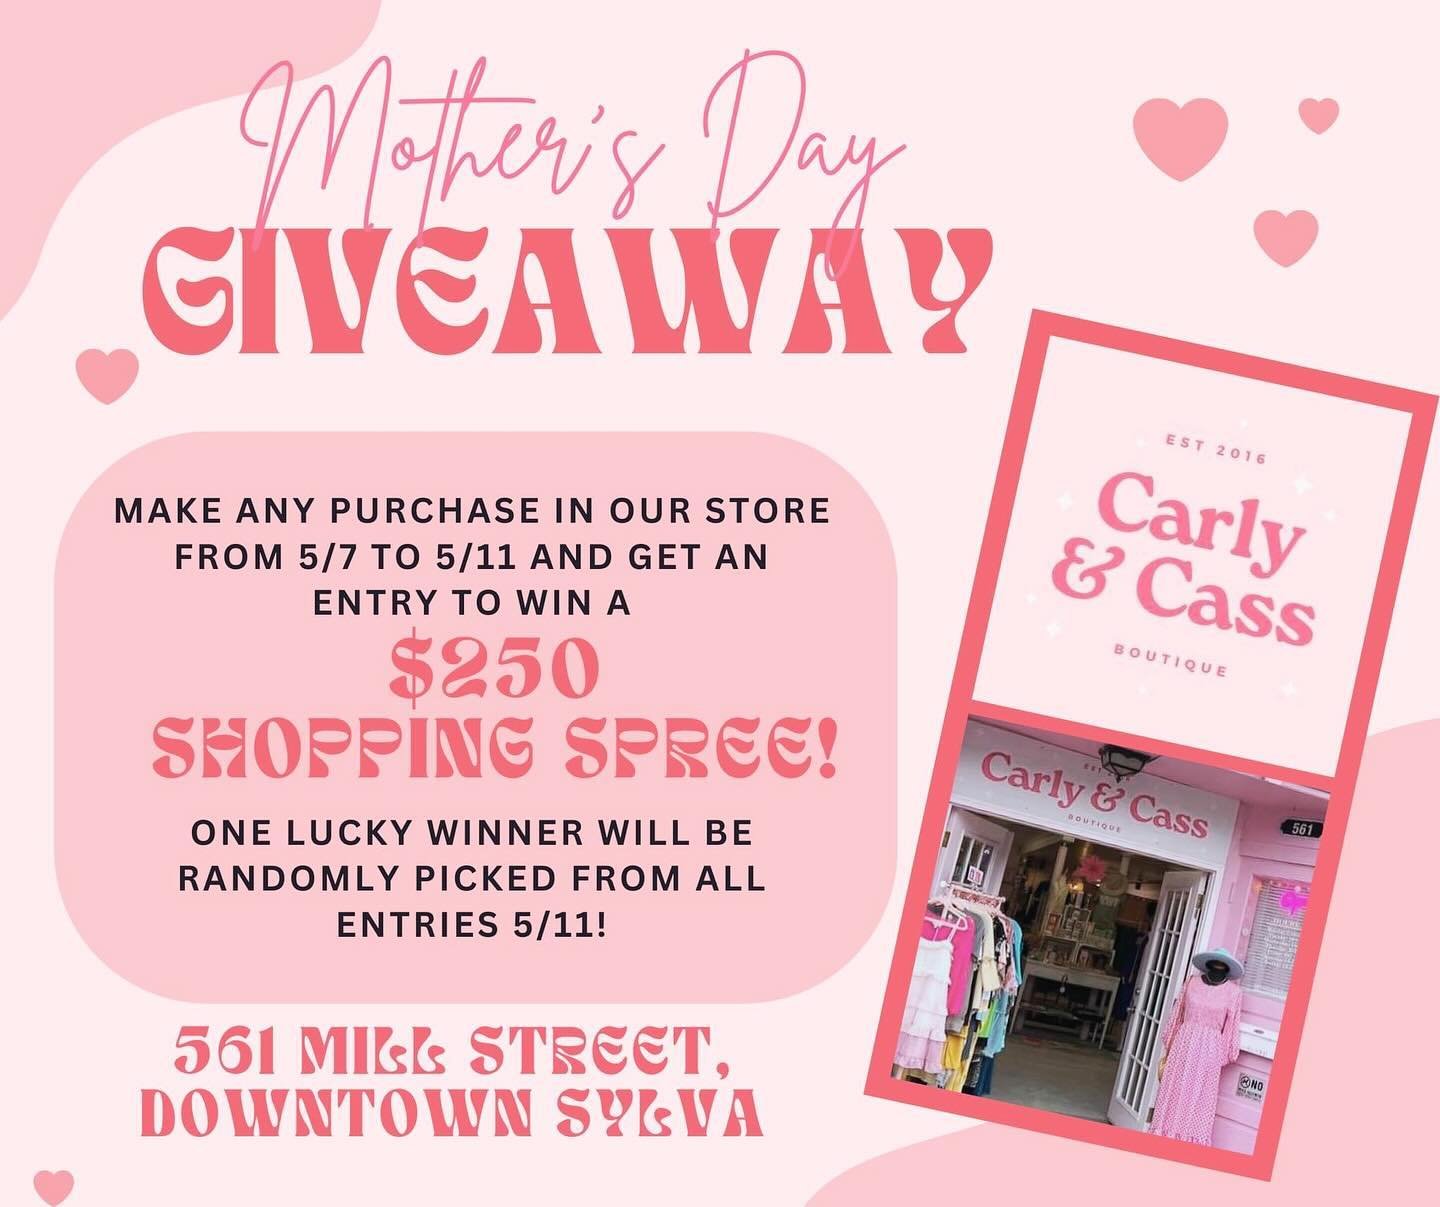 ✨GIVEAWAY!✨ We are giving away a $250 shopping spree in our Sylva store to one lucky winner! 🎁

For a chance to win, make any purchase in our store this week from 5/7 to 5/11 and get an entry ticket. We&rsquo;ll draw one winner randomly from all the